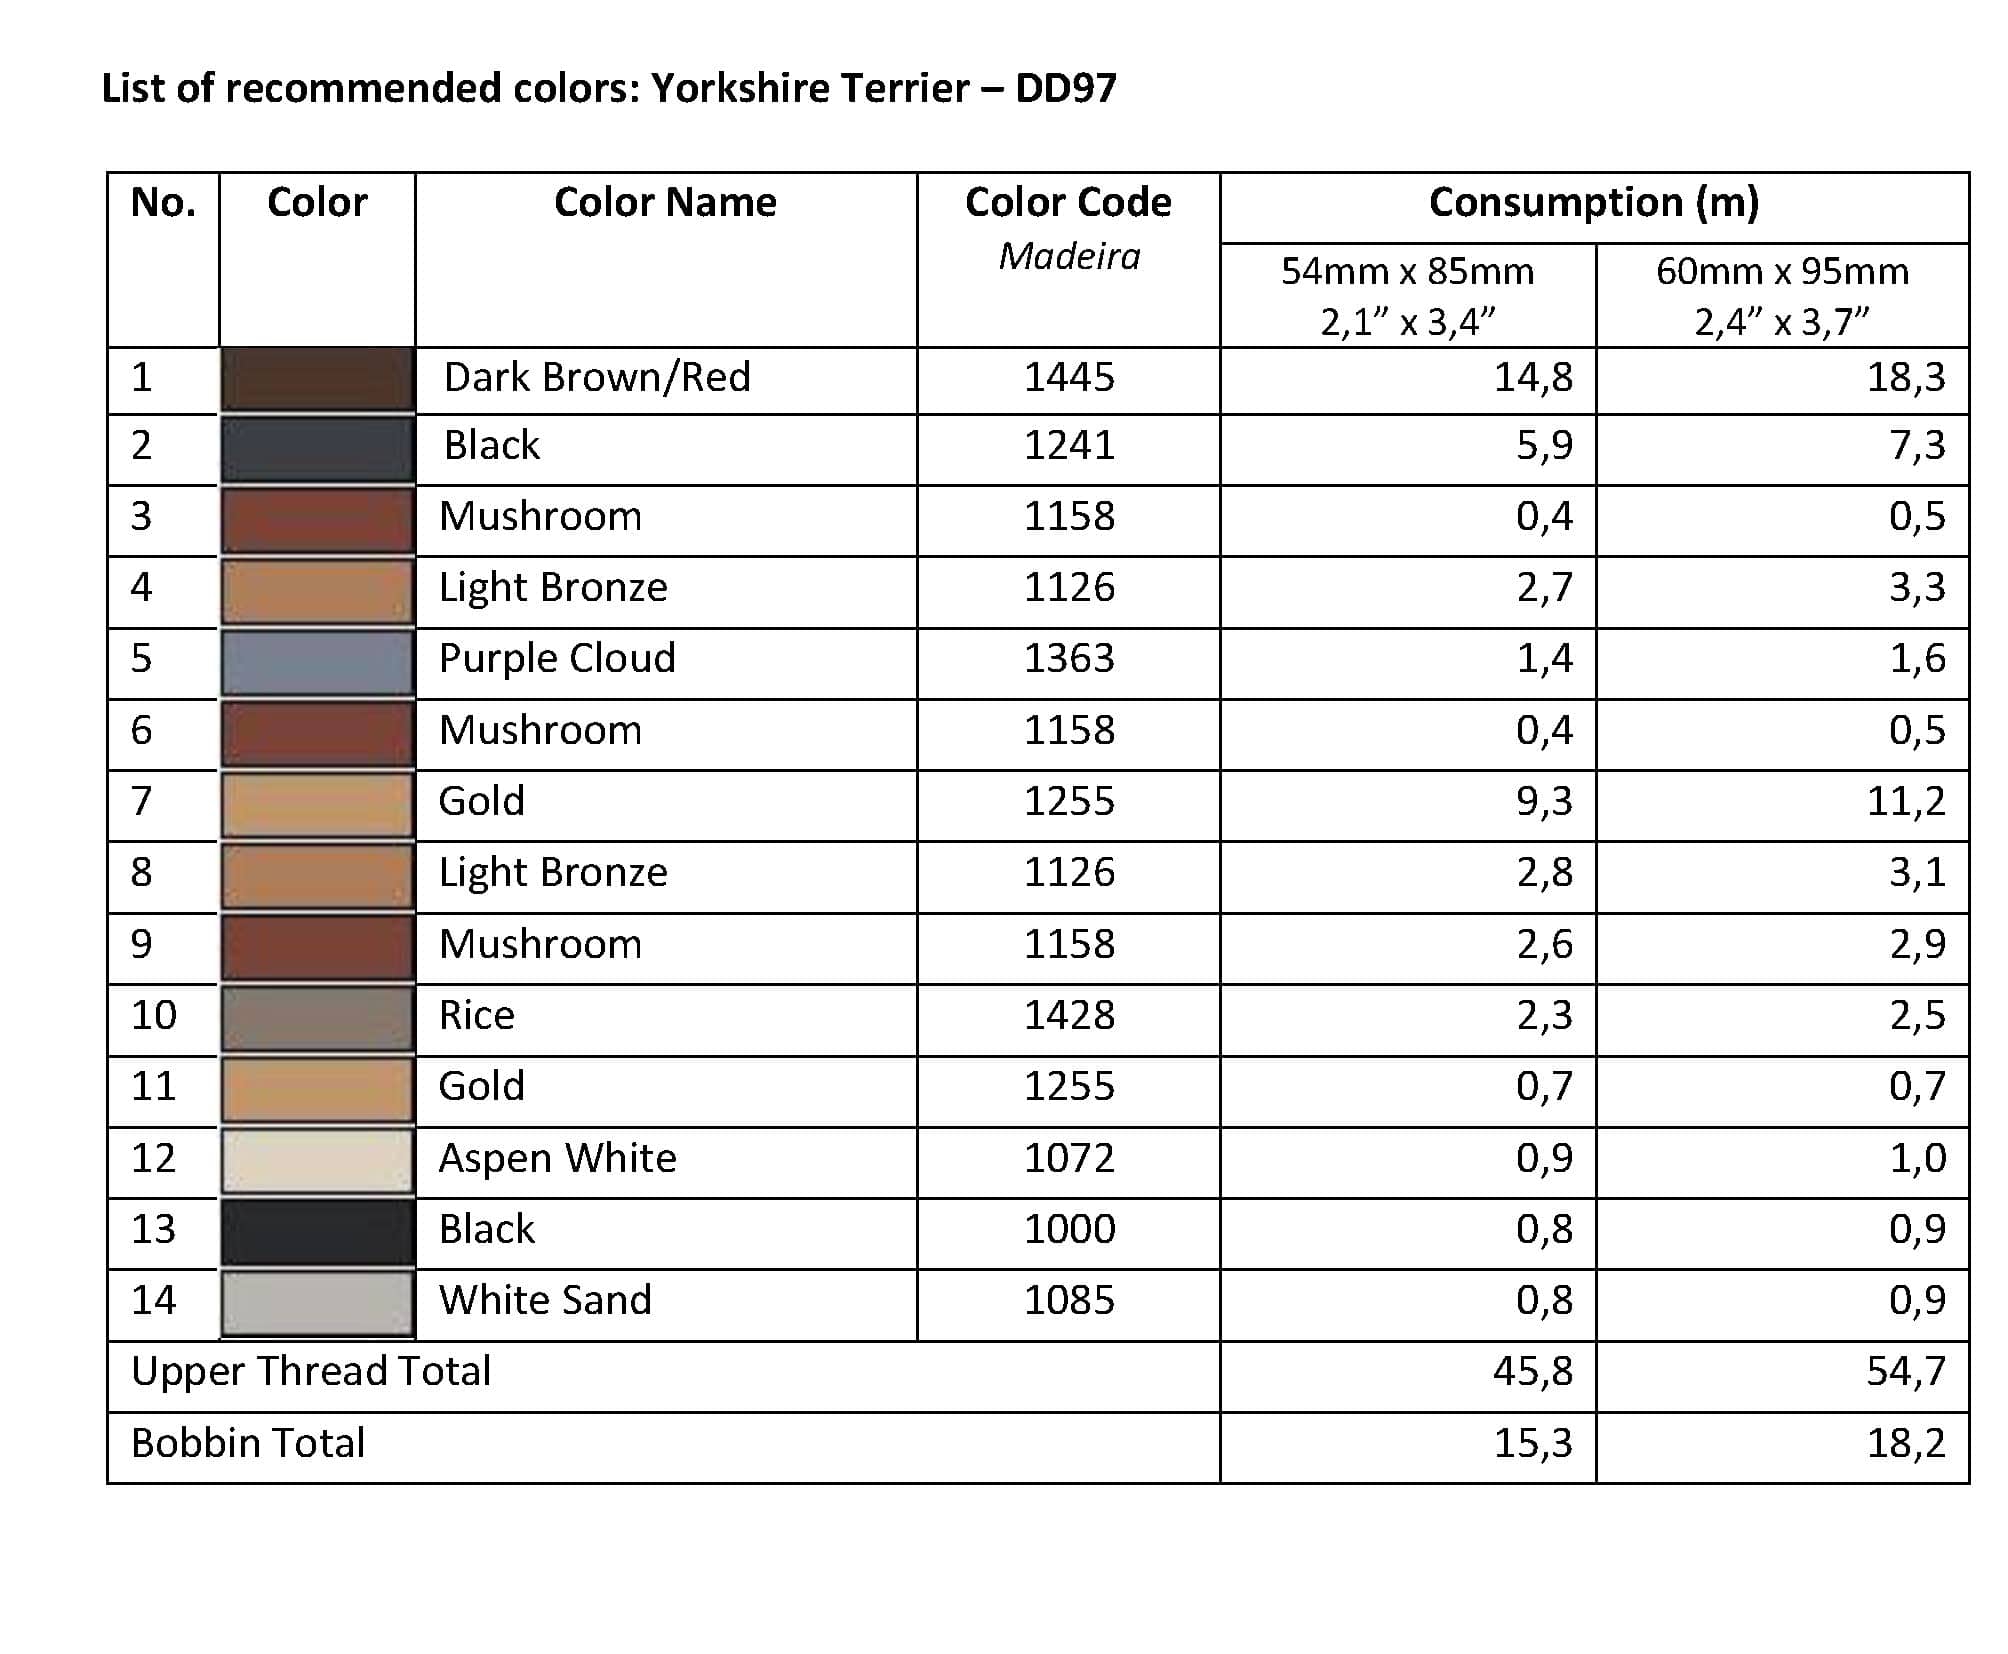 List of Recommended Colors -  Yorkshire Terrier DD97